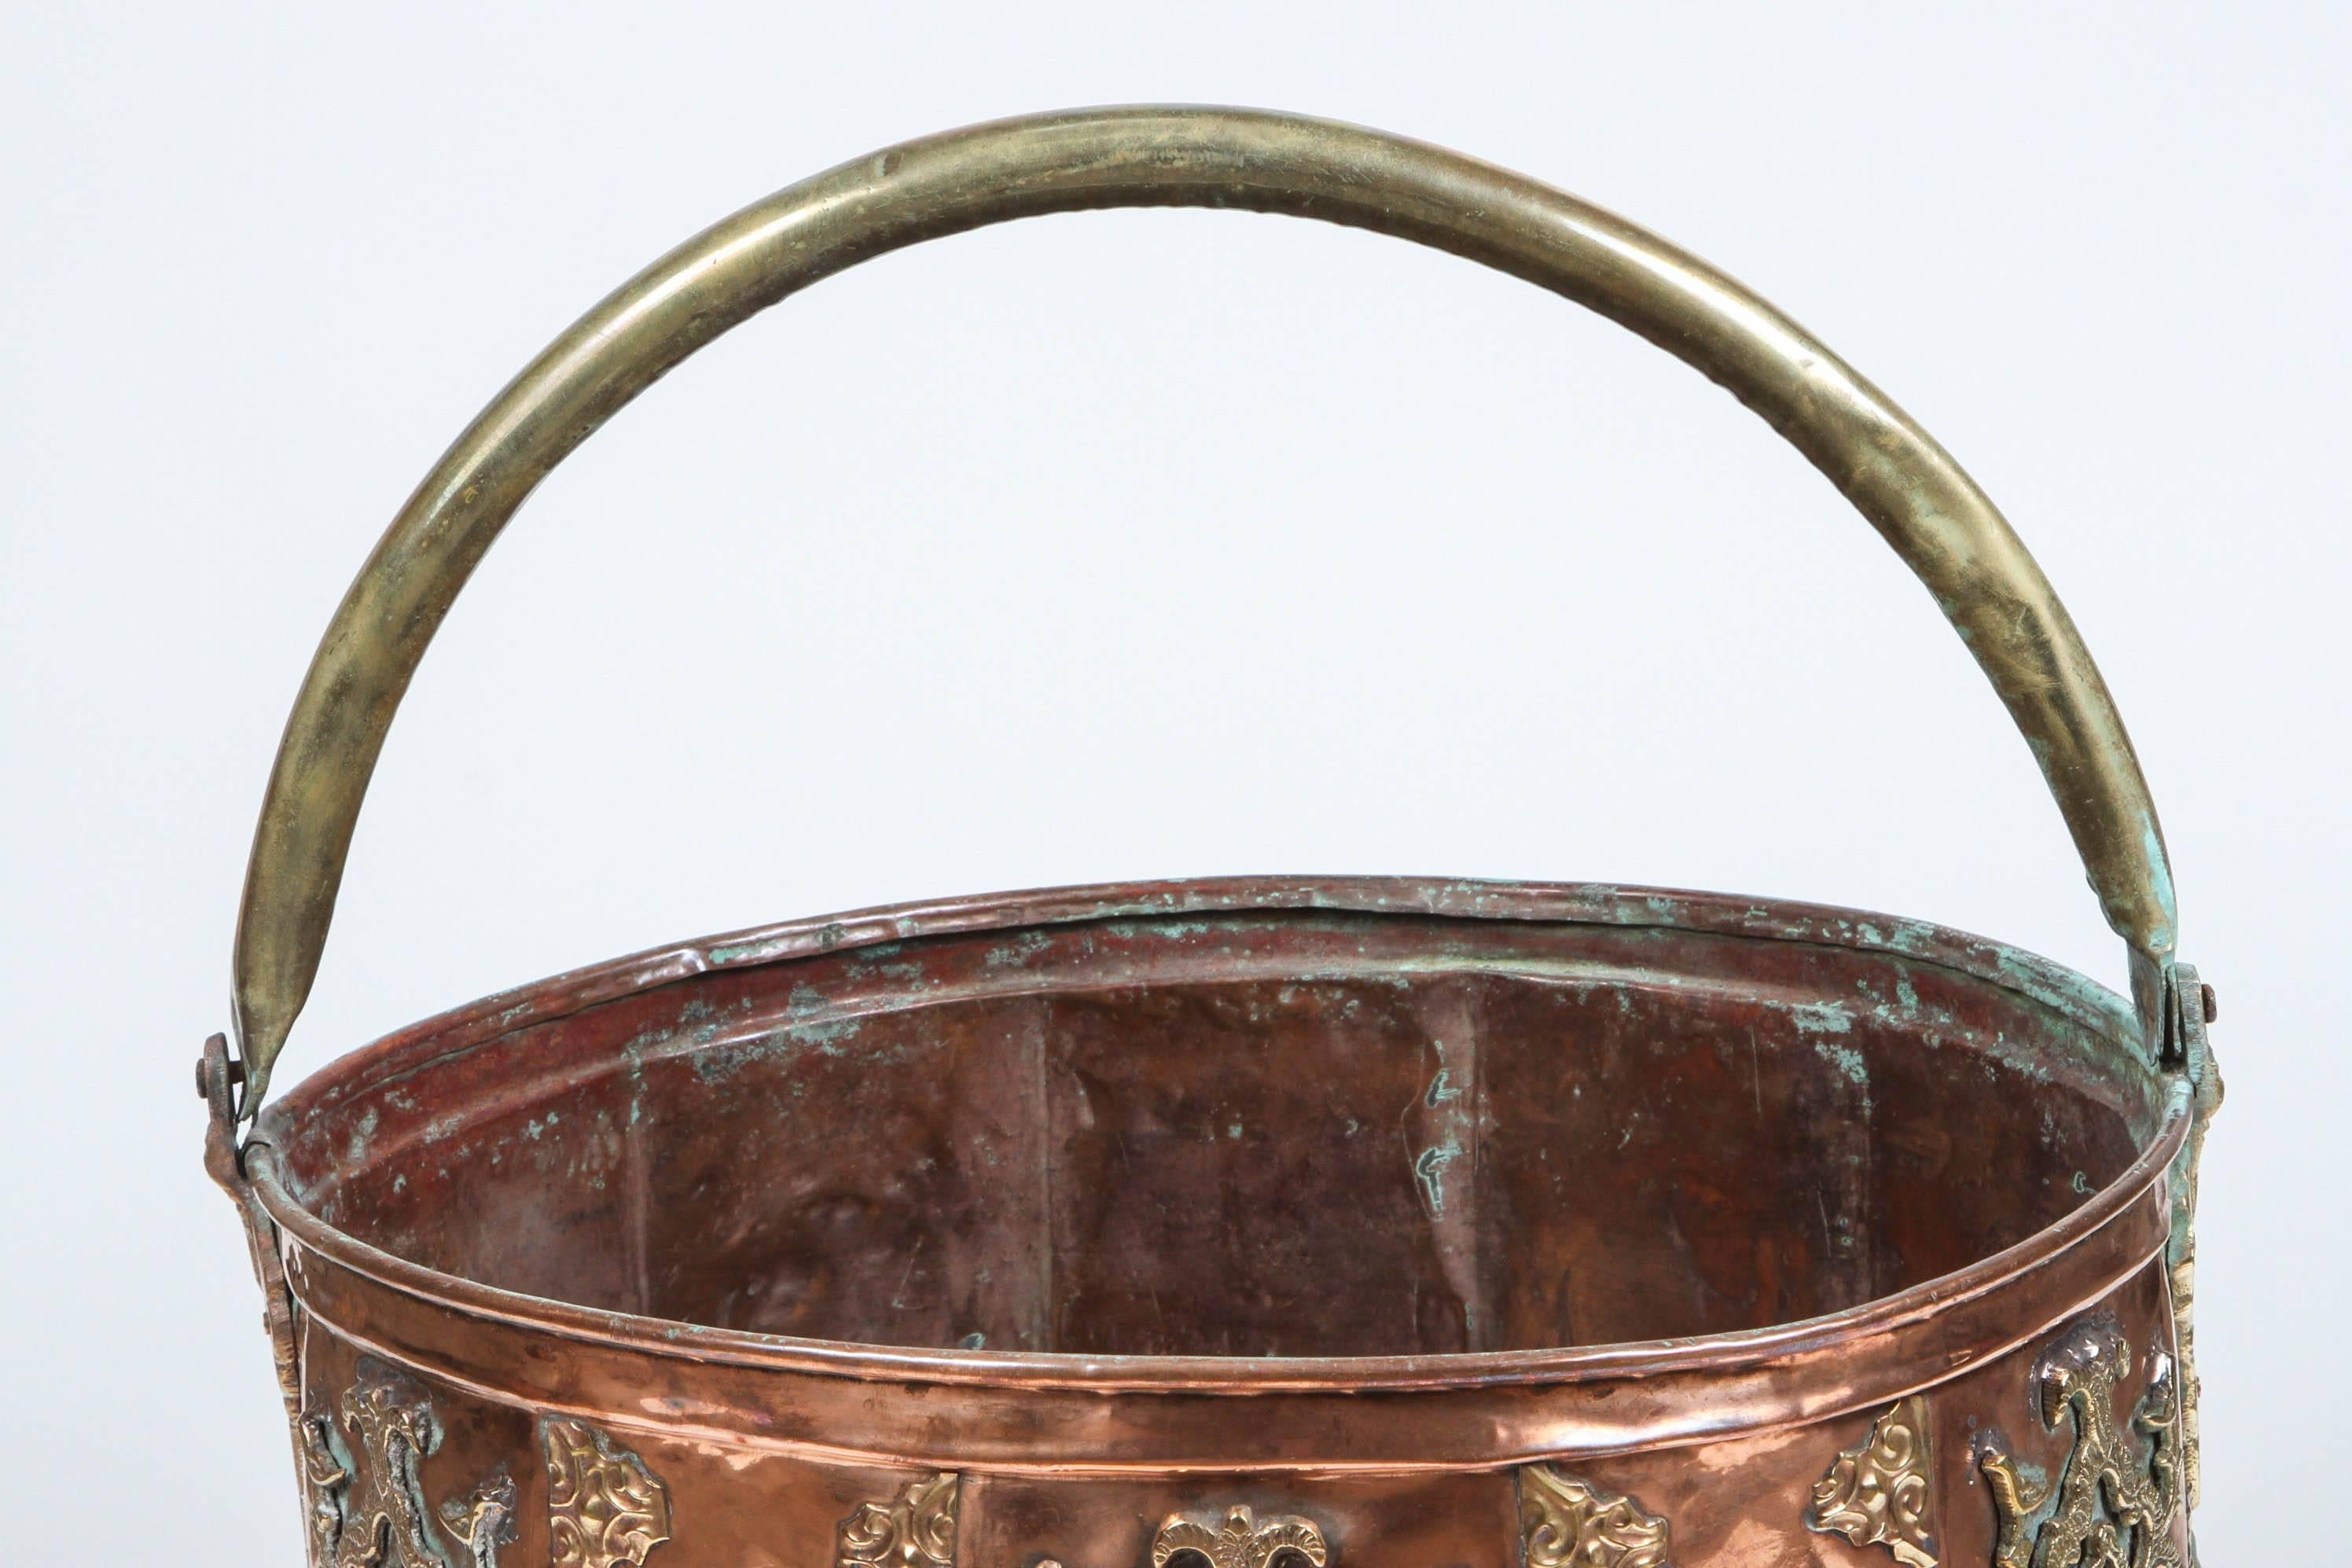 Large Moroccan Moorish polished brass and copper planter, handcrafted and chiseled with Fine Moorish designs and foliate designs.
Copper red and polished brass gold carvings on the exterior.
Very decorative round shape brass plant holder or